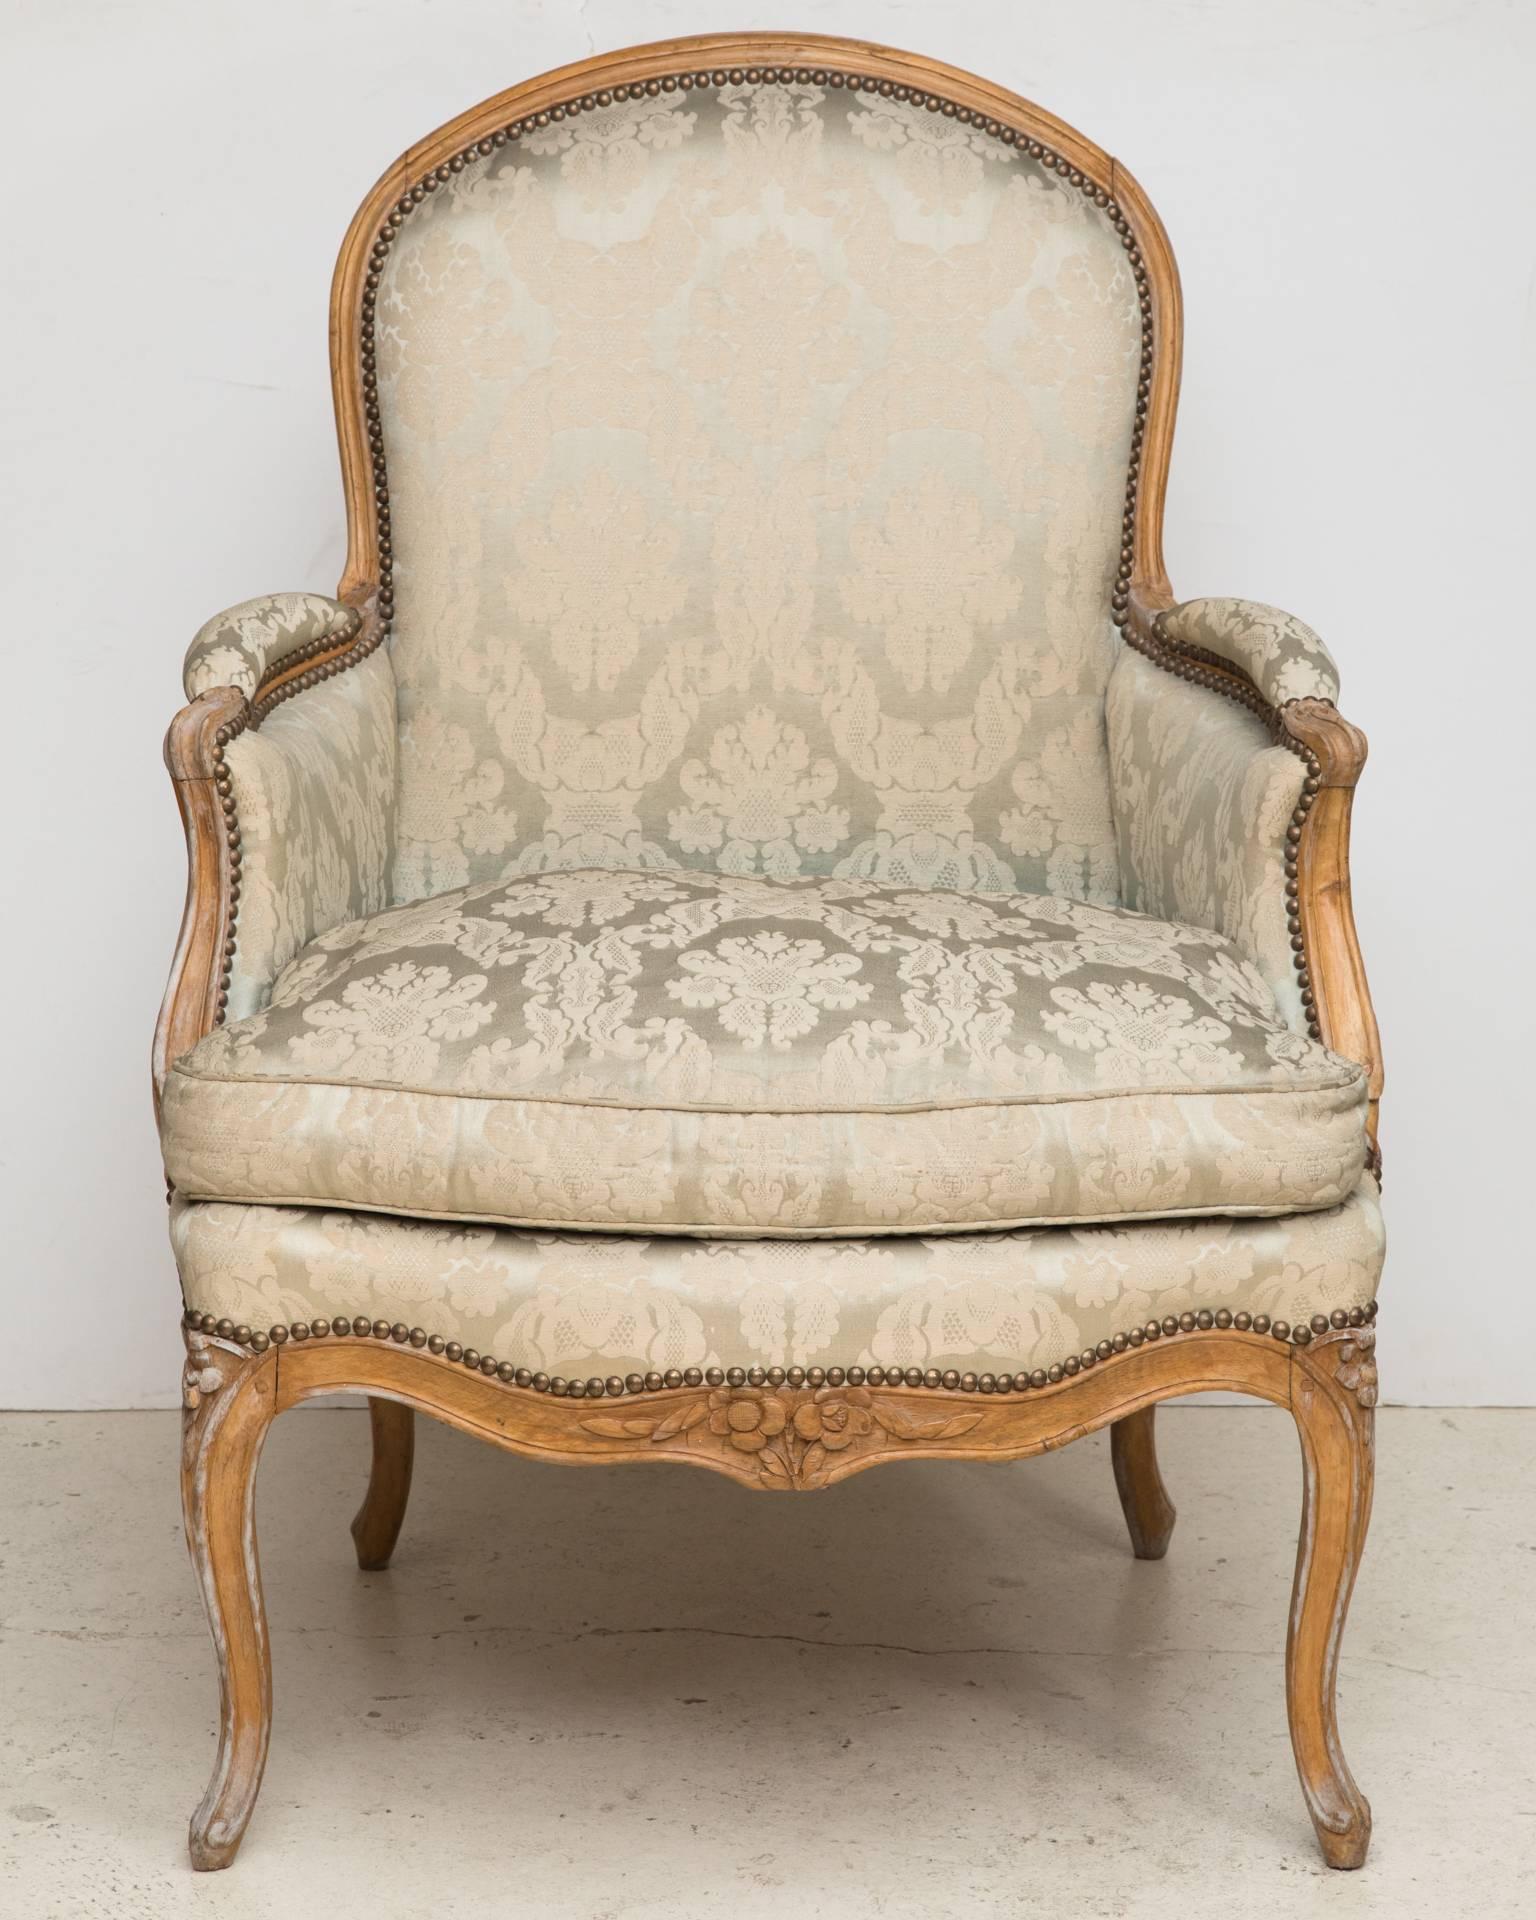 Beech frame curve backed armchair with Rococo carved cabriole legs and apron with flowers. Upholstered in beige silk damask with a loose seat cushion. Stamped by the maker, Noël Baudin, ébéniste reçu maître en 1763.
France, circa 1765.